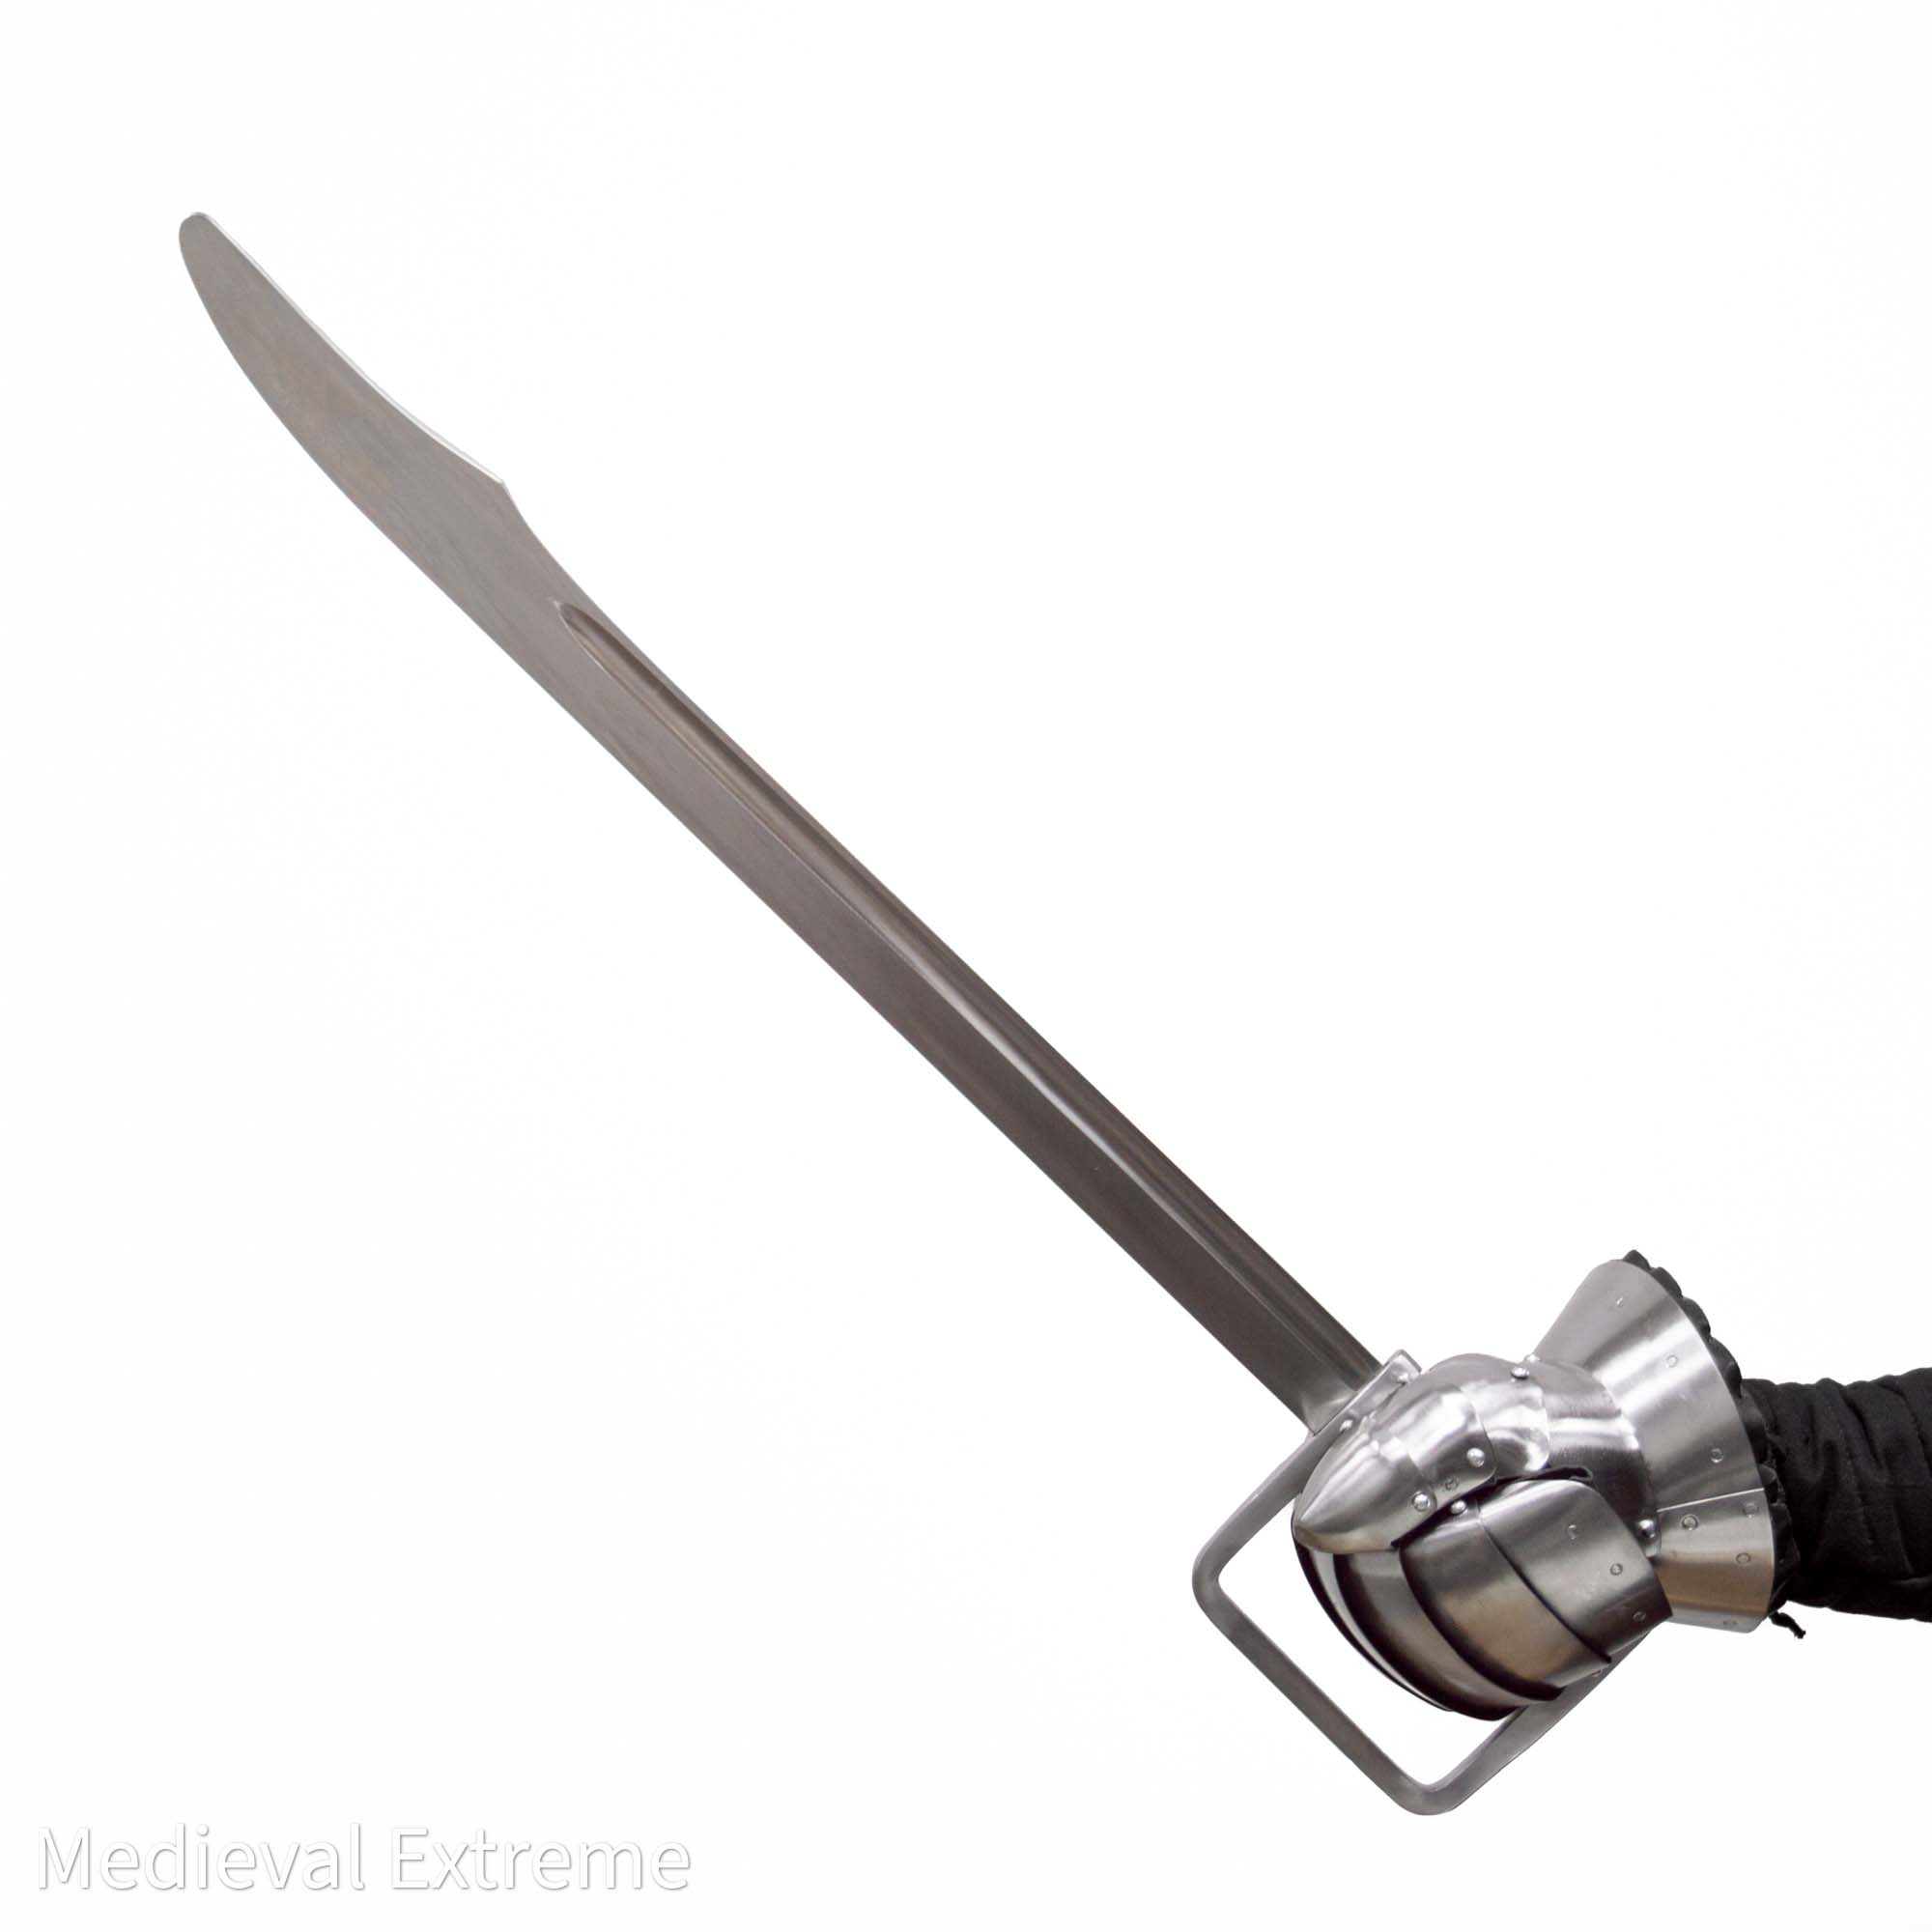 Falchion for medieval combat “Storm” in hand